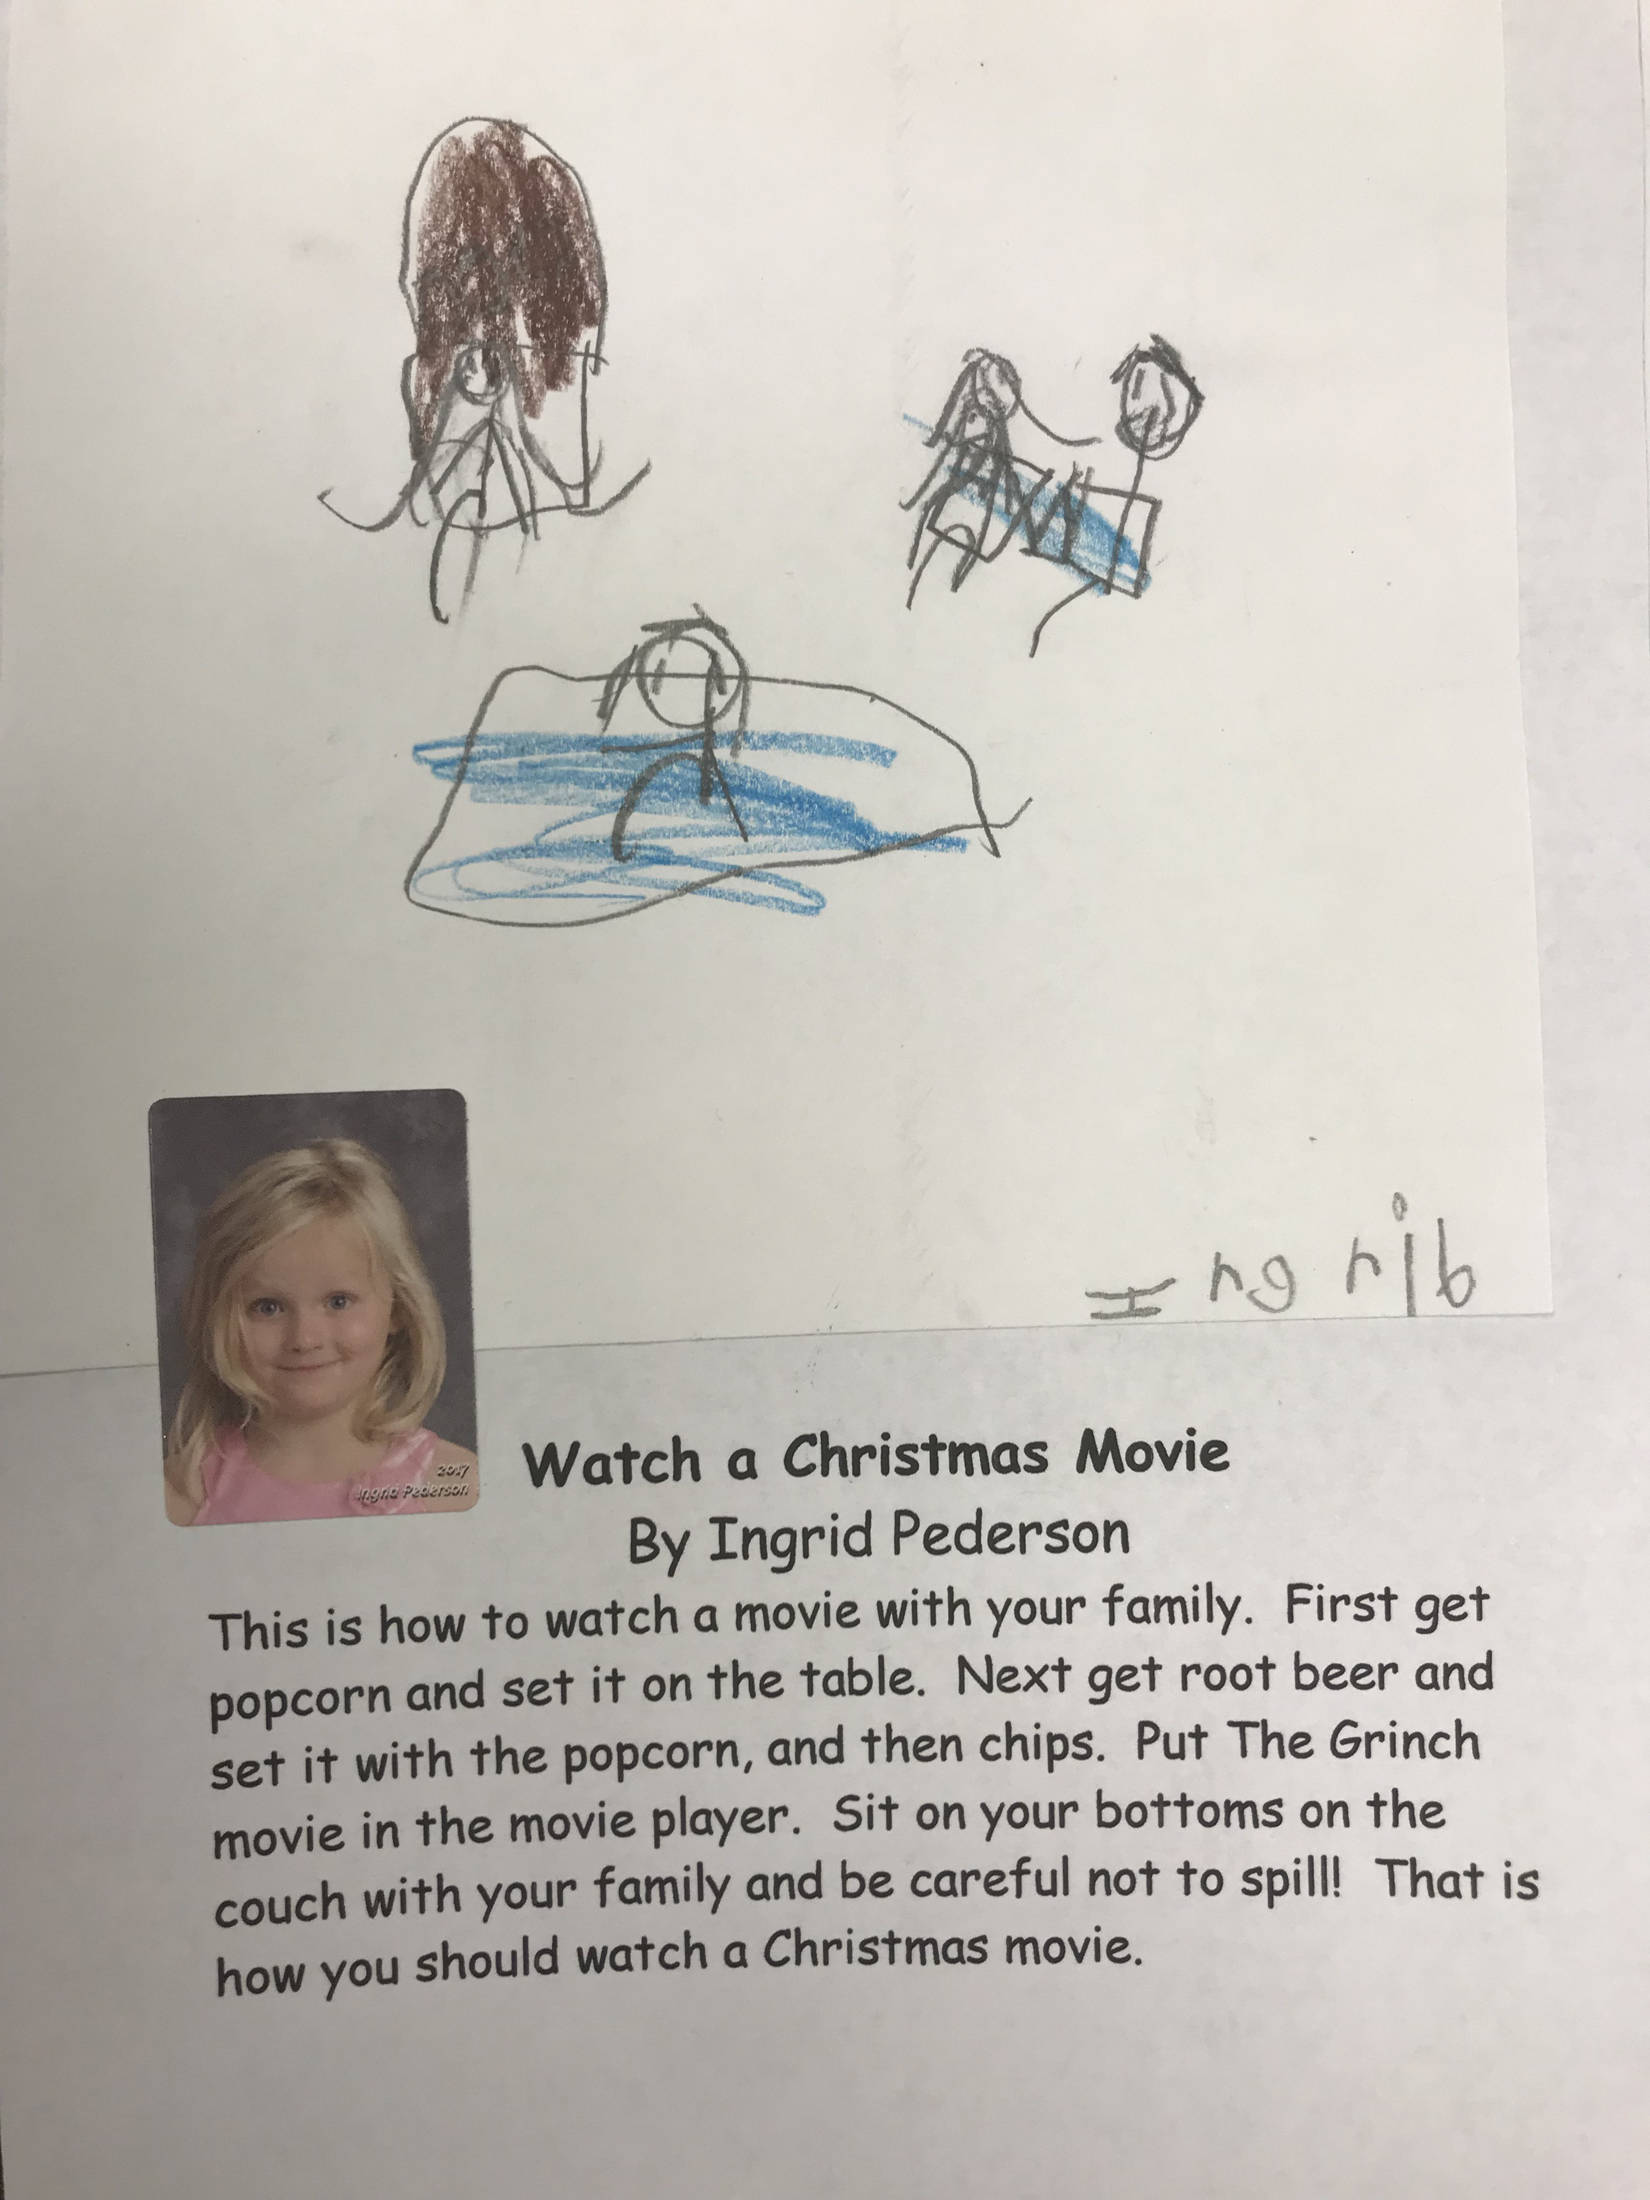 This holiday instruction made by Ingrid Pederson is part of an 18-page “How to Get Ready for the Holidays” book created by the students of Jennifer Reinhart’s kindergarten class. (Photo courtesy Jennifer Reinhart)